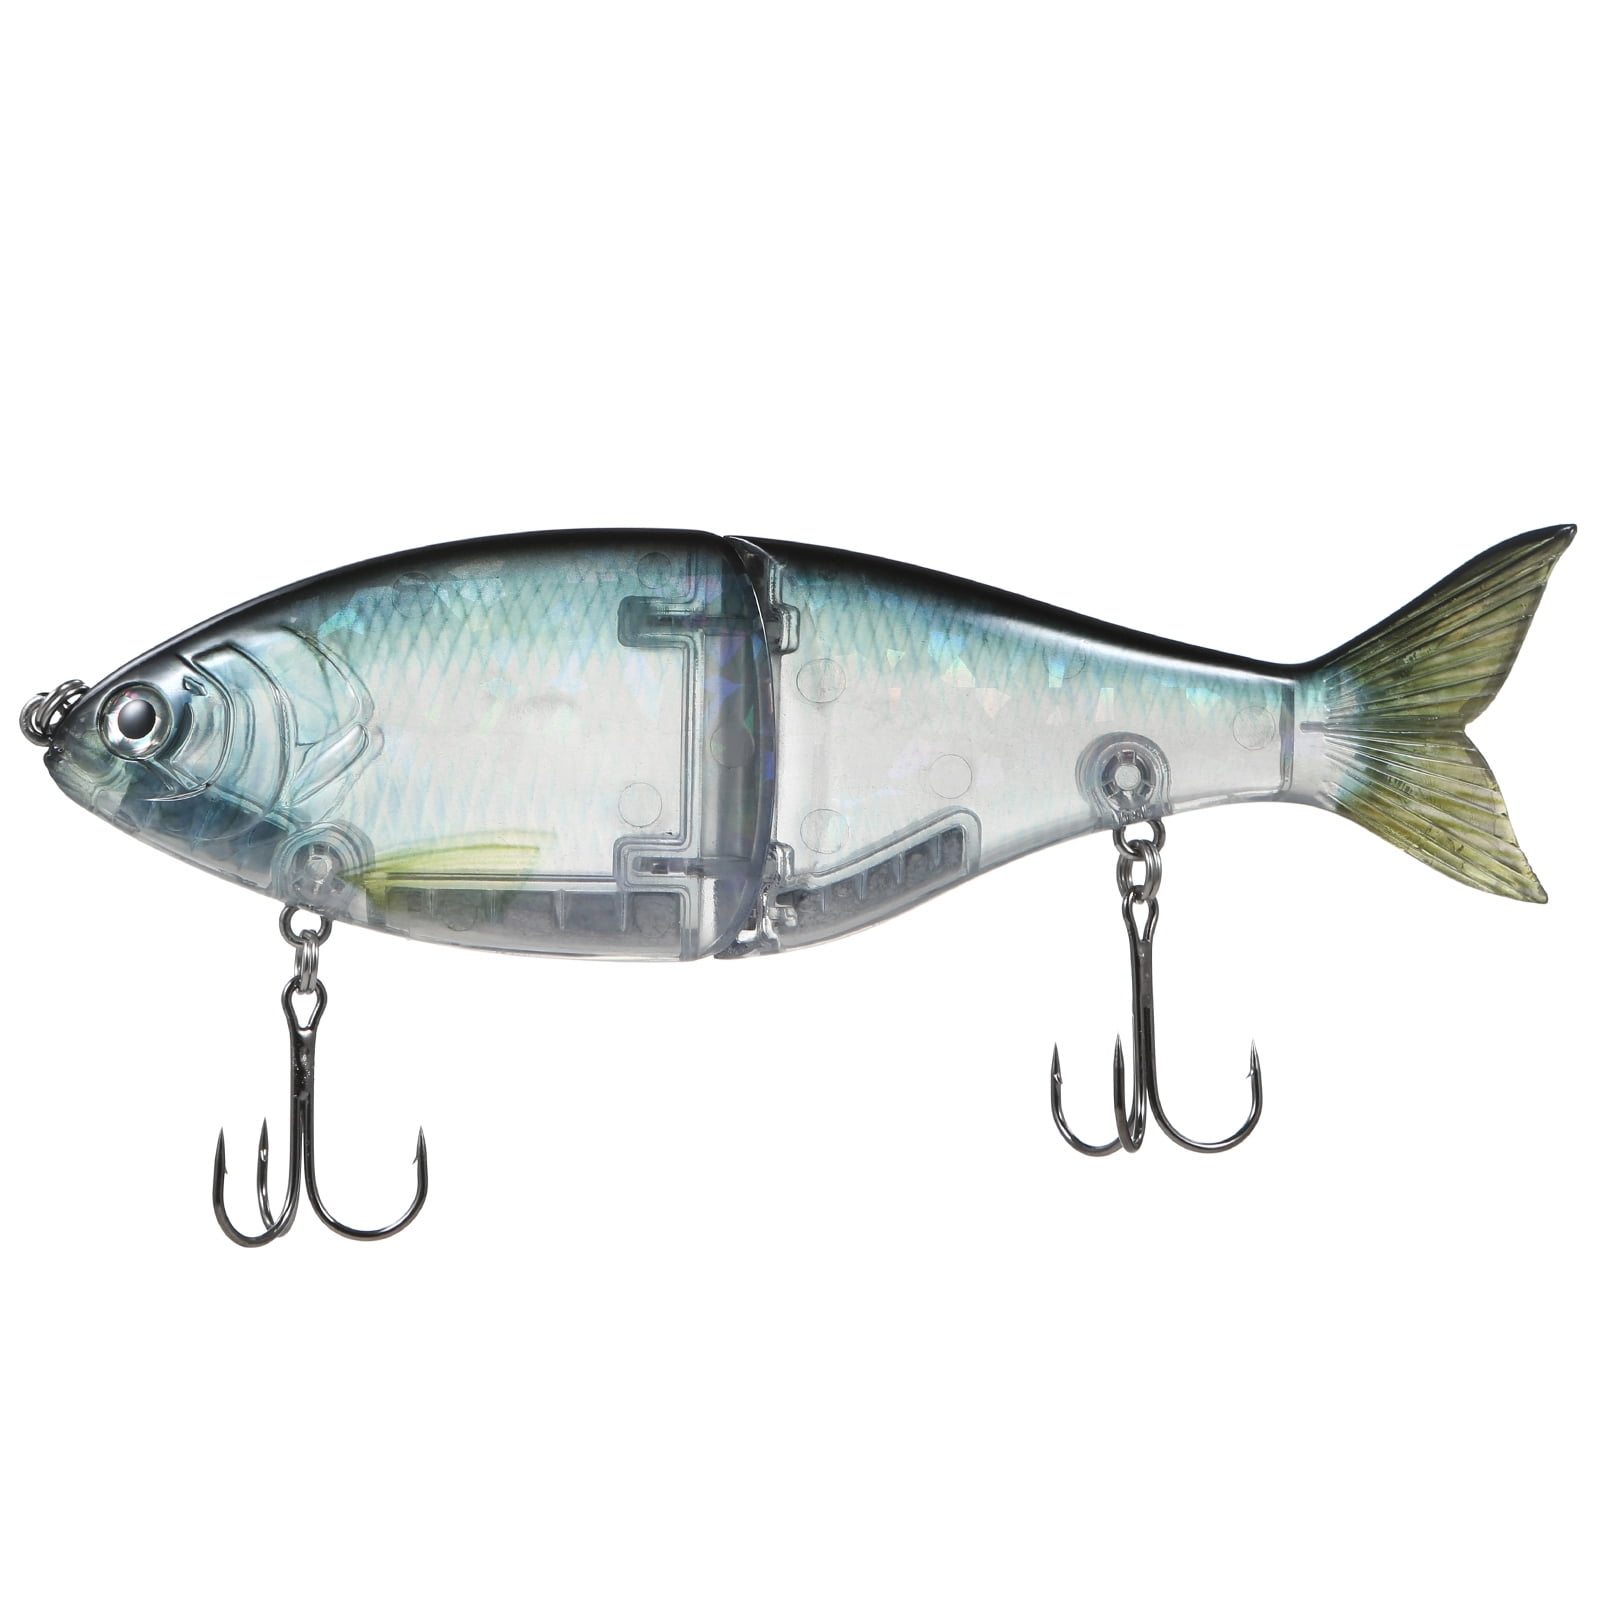 Tackle House Sinking Shad 70mm 13g Glide Bait Used Lures Fishing